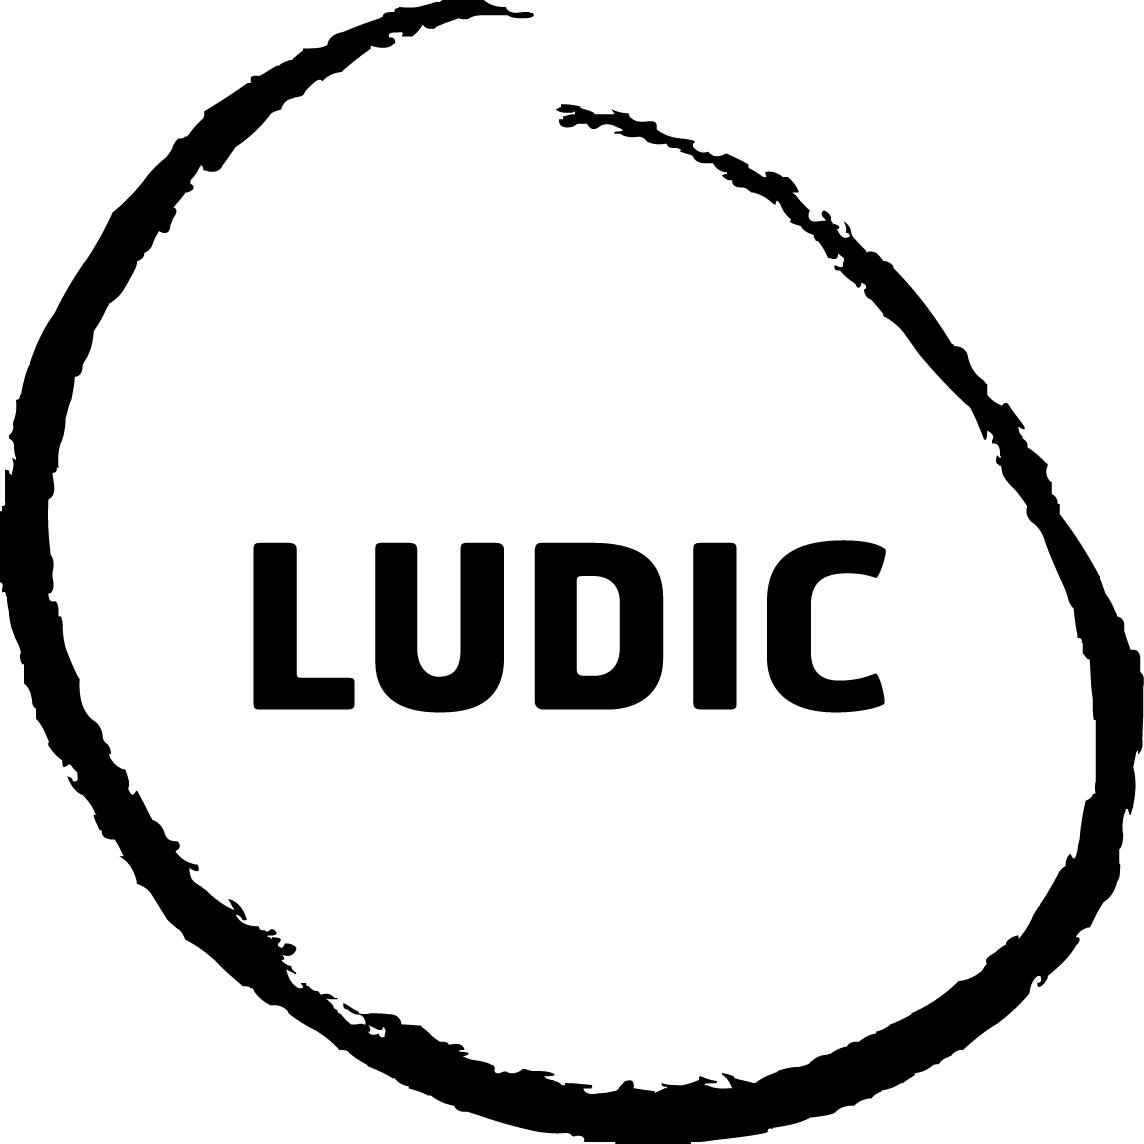 LUDIC_LOGO_BLACK_new Services: Think Tank - Ludic Consulting